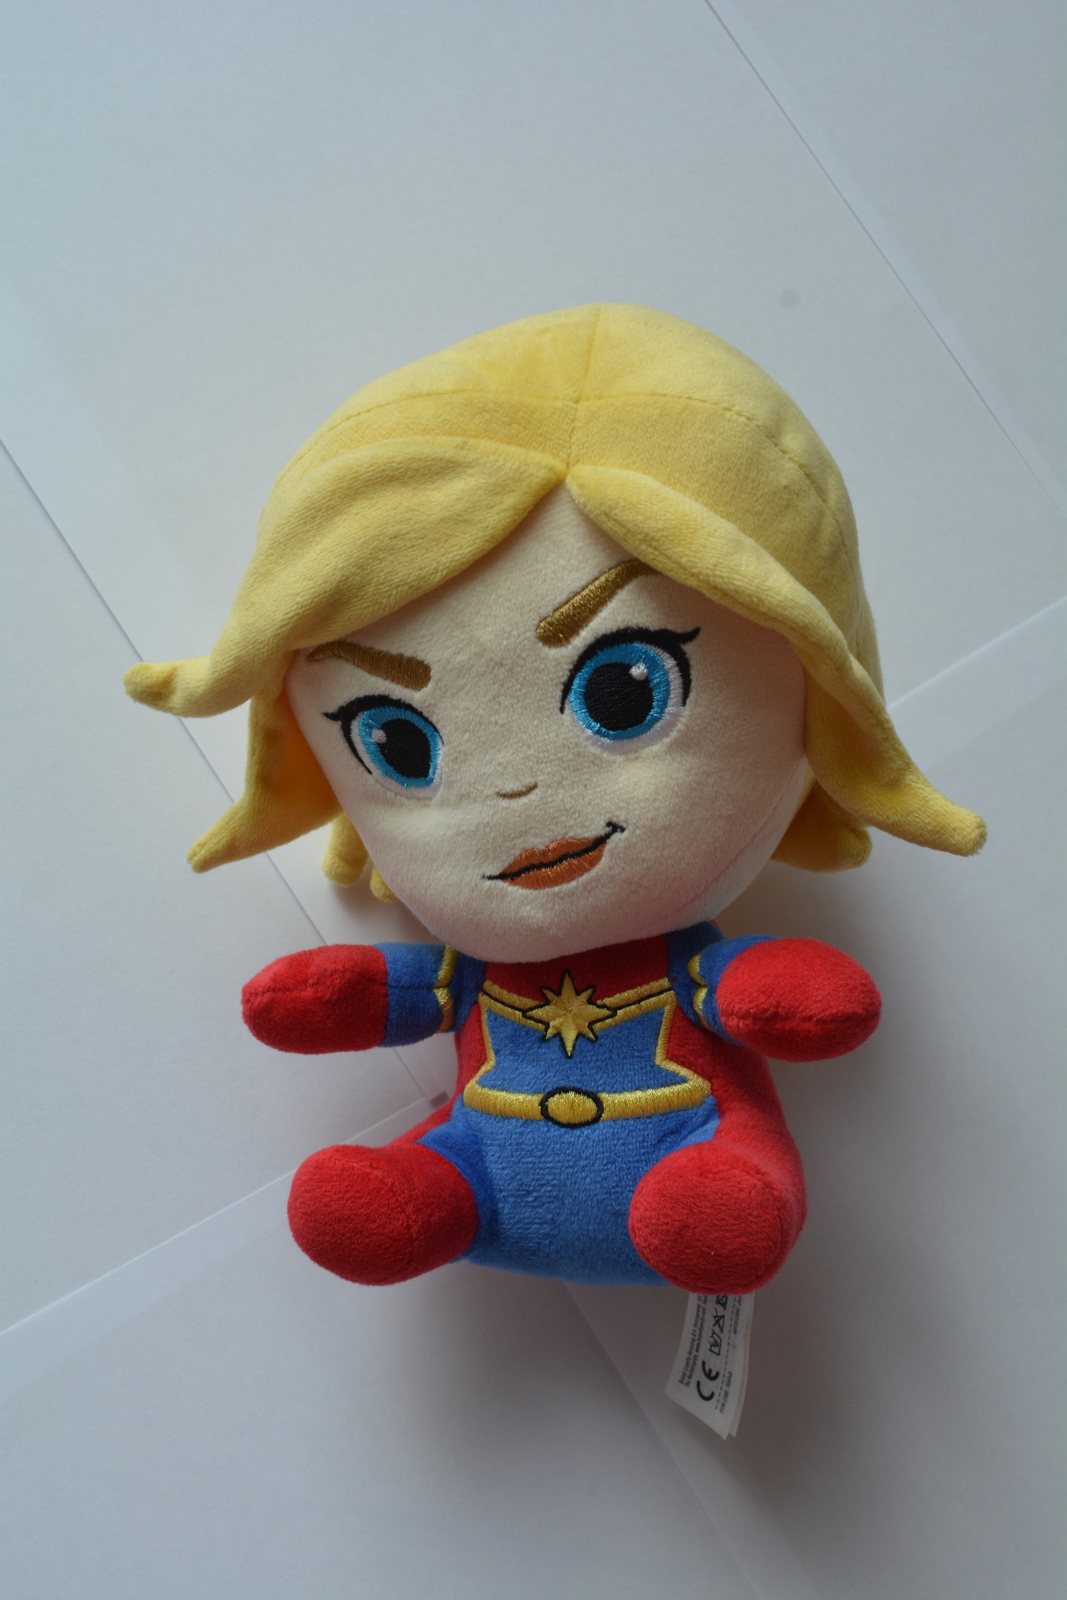 Marvel Captain Marvel Plush Blond Used Please look at the pictures - $20.00